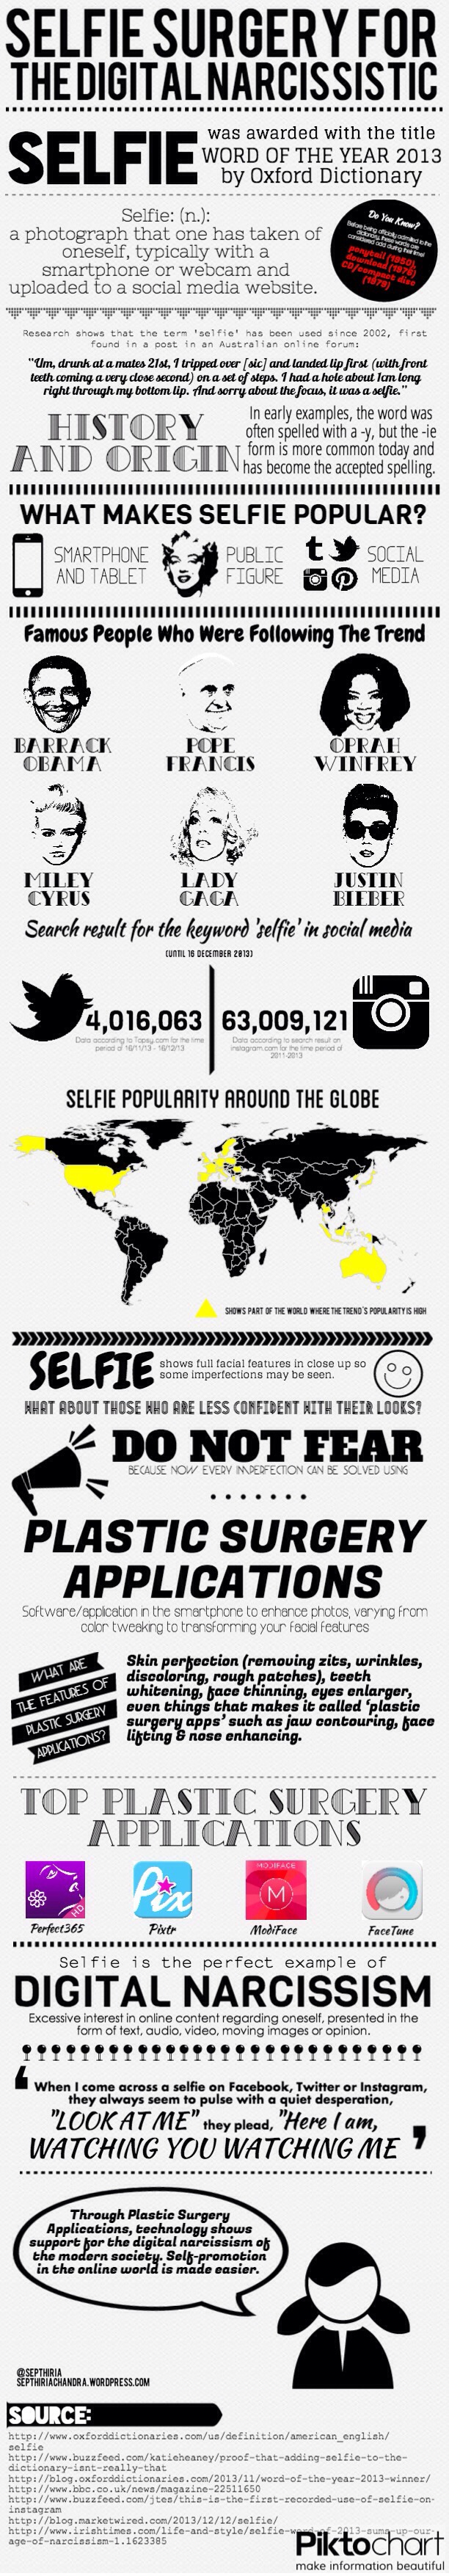 Selfie Surgery for The Digital Narcissistic Infographic (English Version)